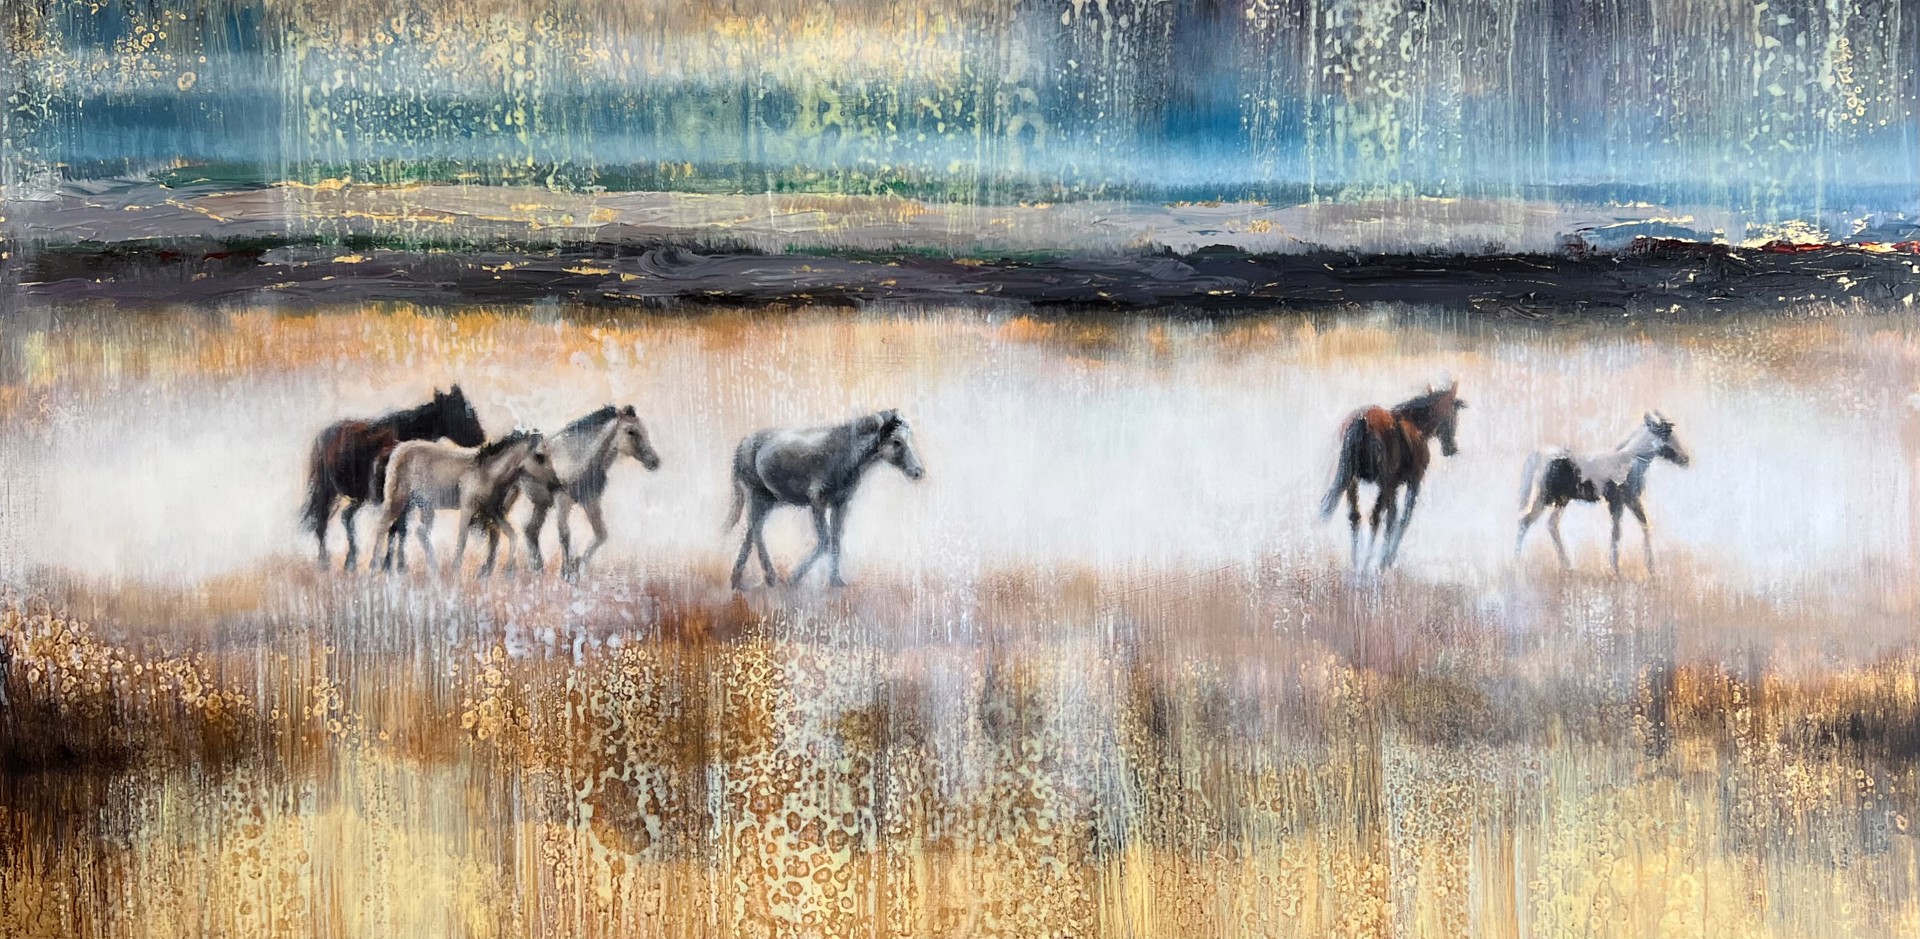 Original Mixed Media Painting By Nealy Riley Featuring Horse Herd Over Abstract Background